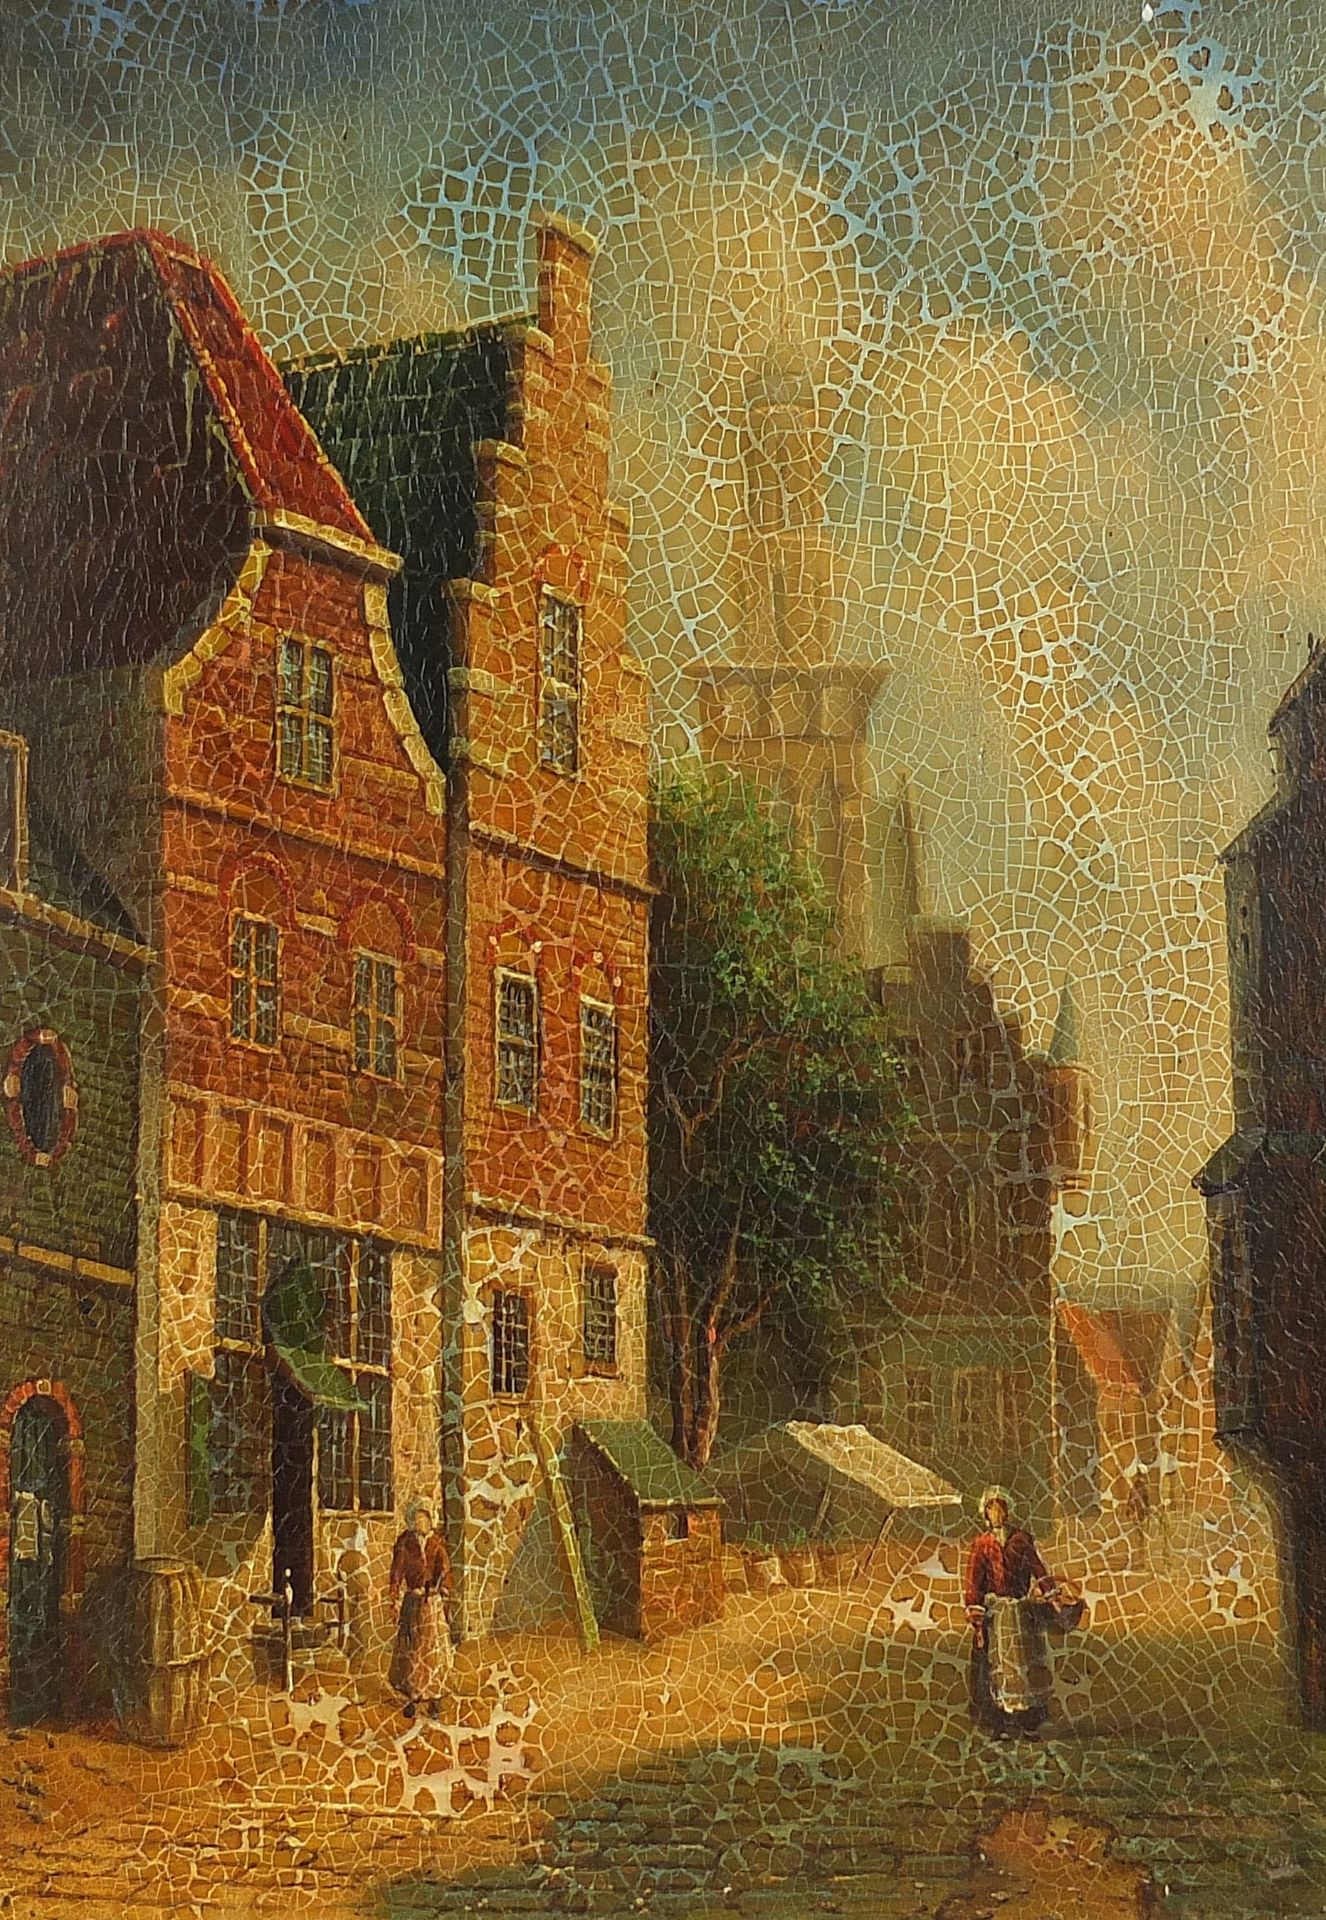 Continental street scene with figures, mounted and framed, 39.5cm x 29.5cm excluding the mount and